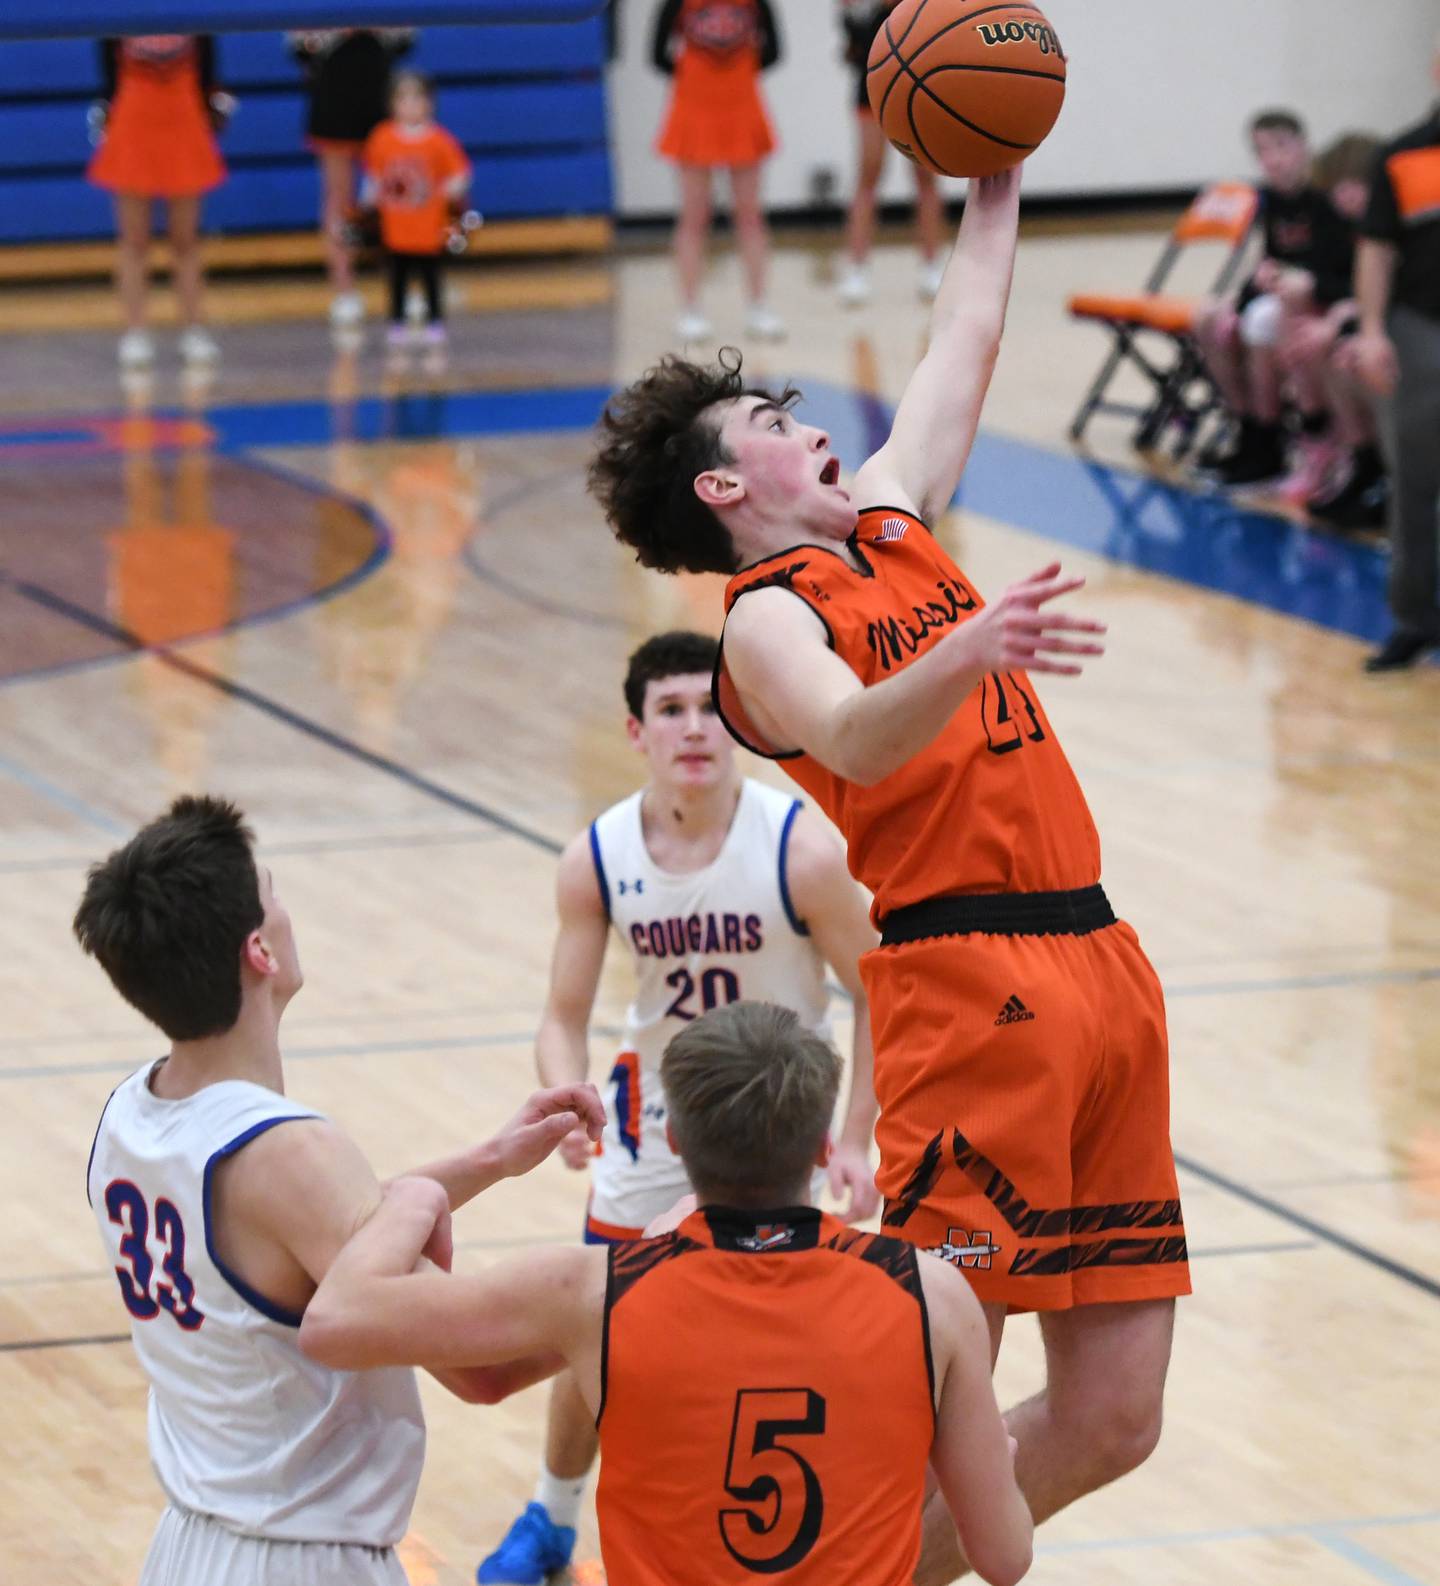 Milledgeville's Colton Hendick (24) jumps for a rebound during 1A regional action against Eastland in Lanark on Saturday.